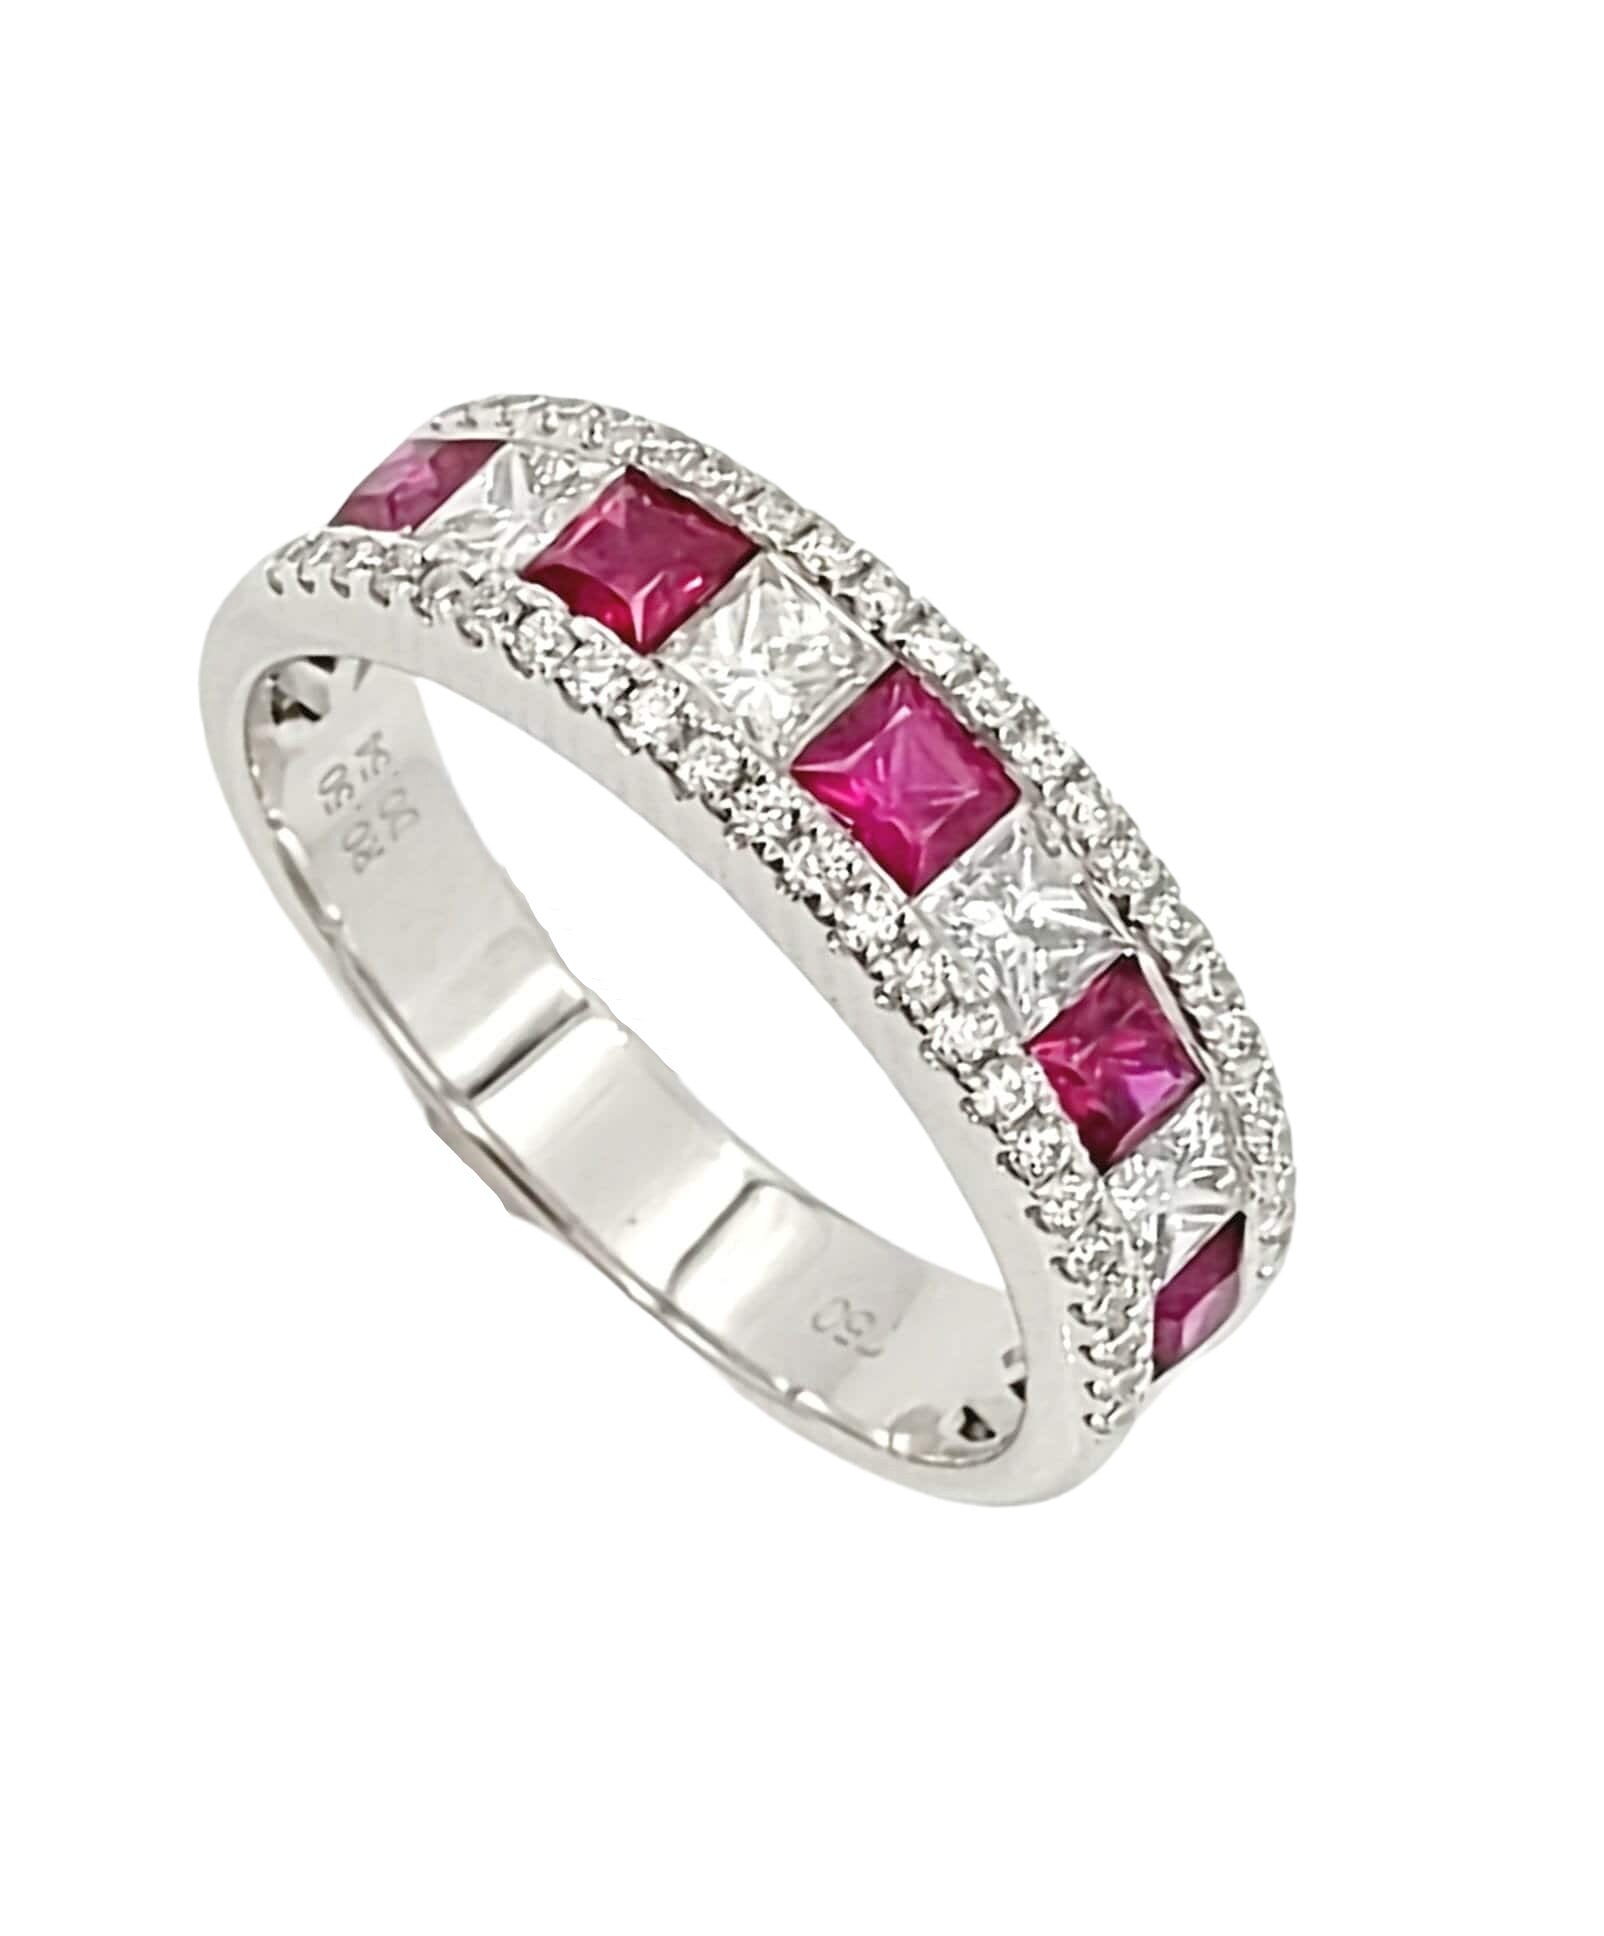 18k white gold Diamond and Ruby Ring, Gift for Her Christmas Ring Jewelry